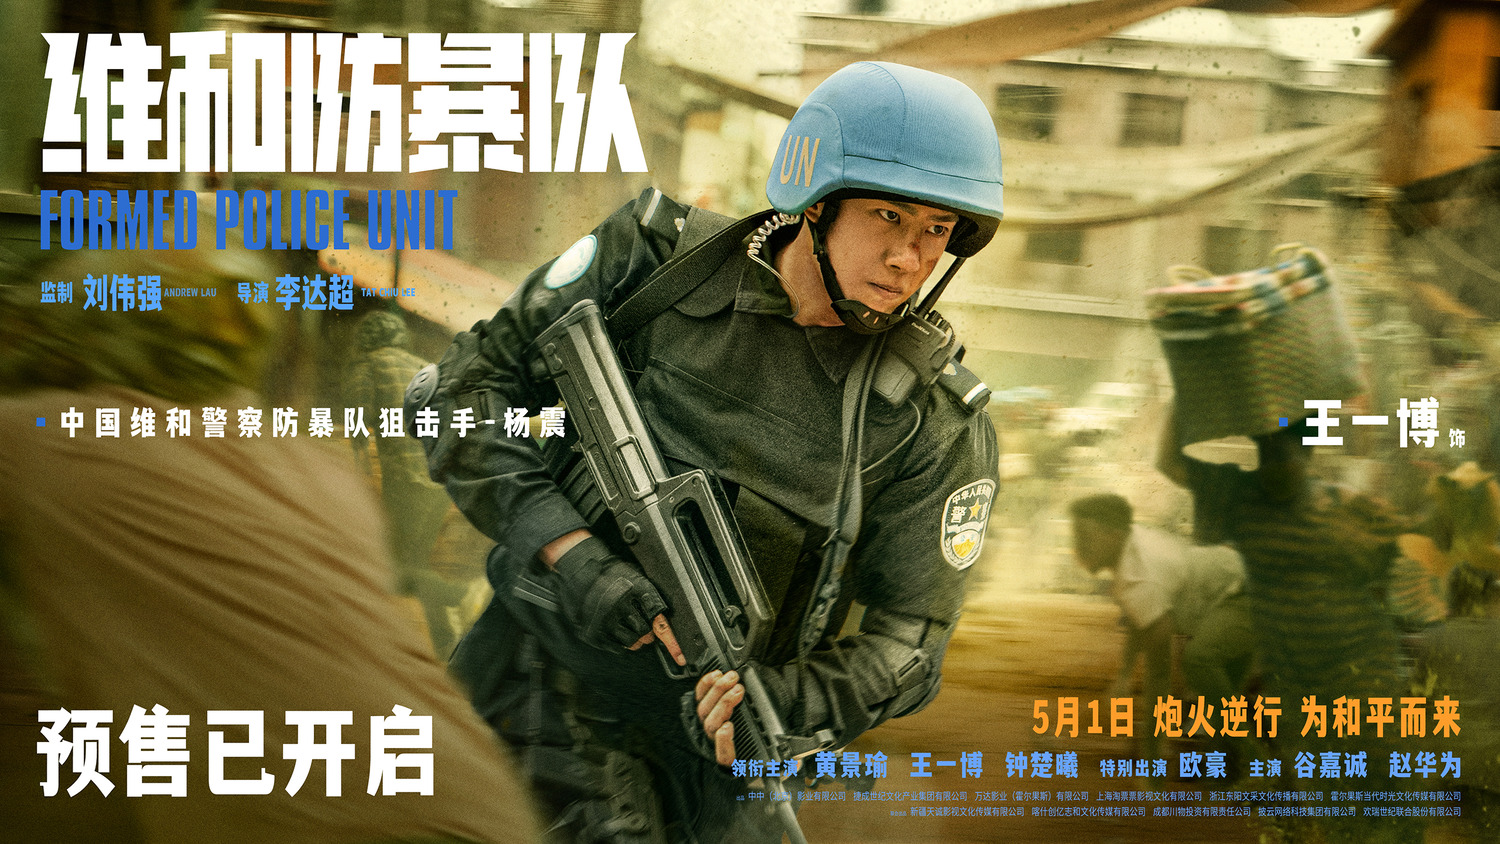 Extra Large Movie Poster Image for Weihe Fangbao Dui (#4 of 6)